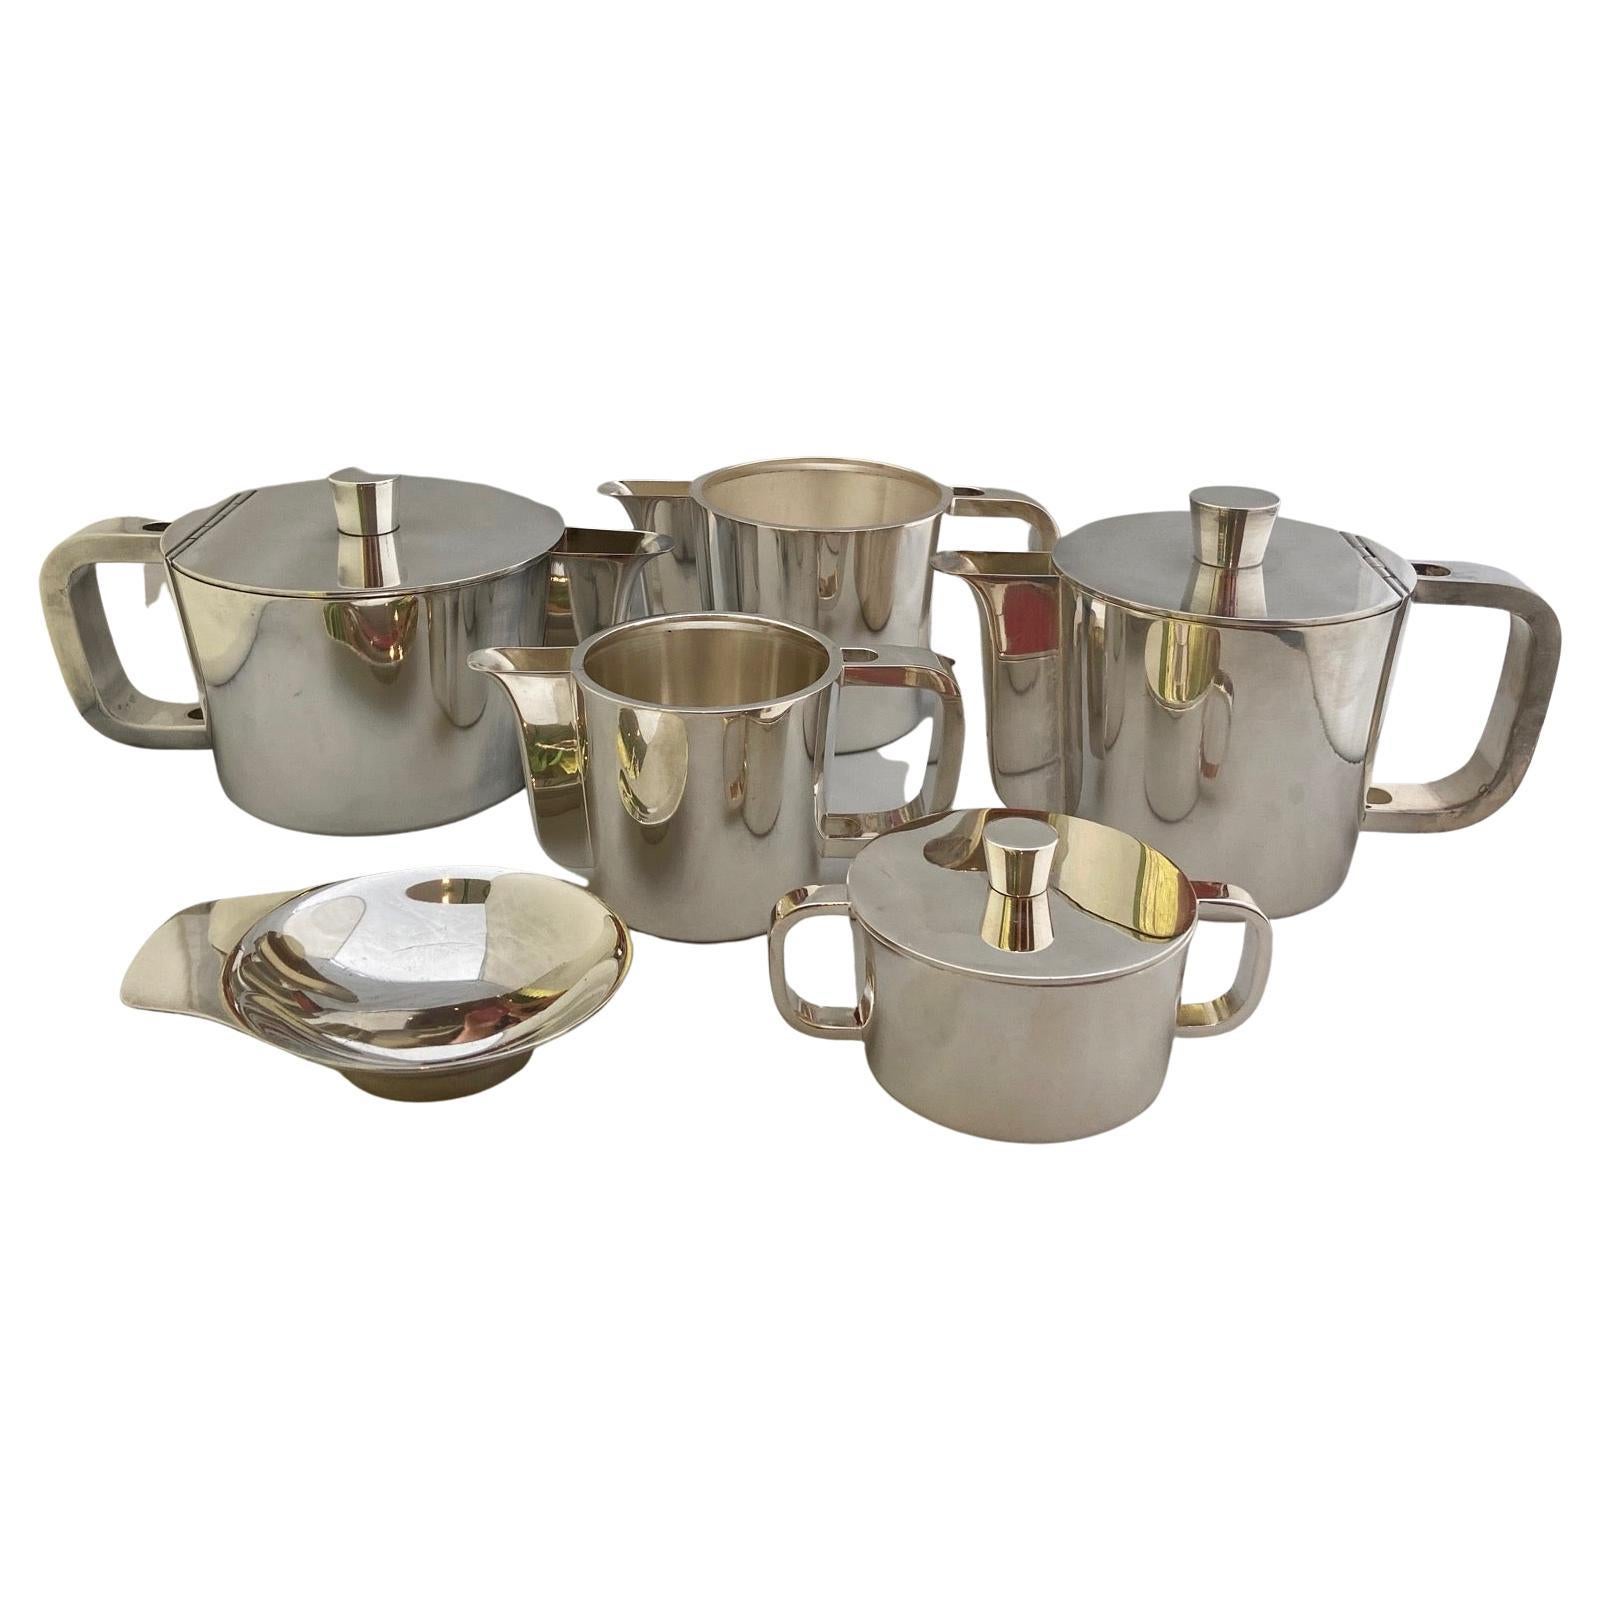 Extensive Silver Plated Gio Ponti Coffee and Tea Set on a Tray, Arthur Krupp 4